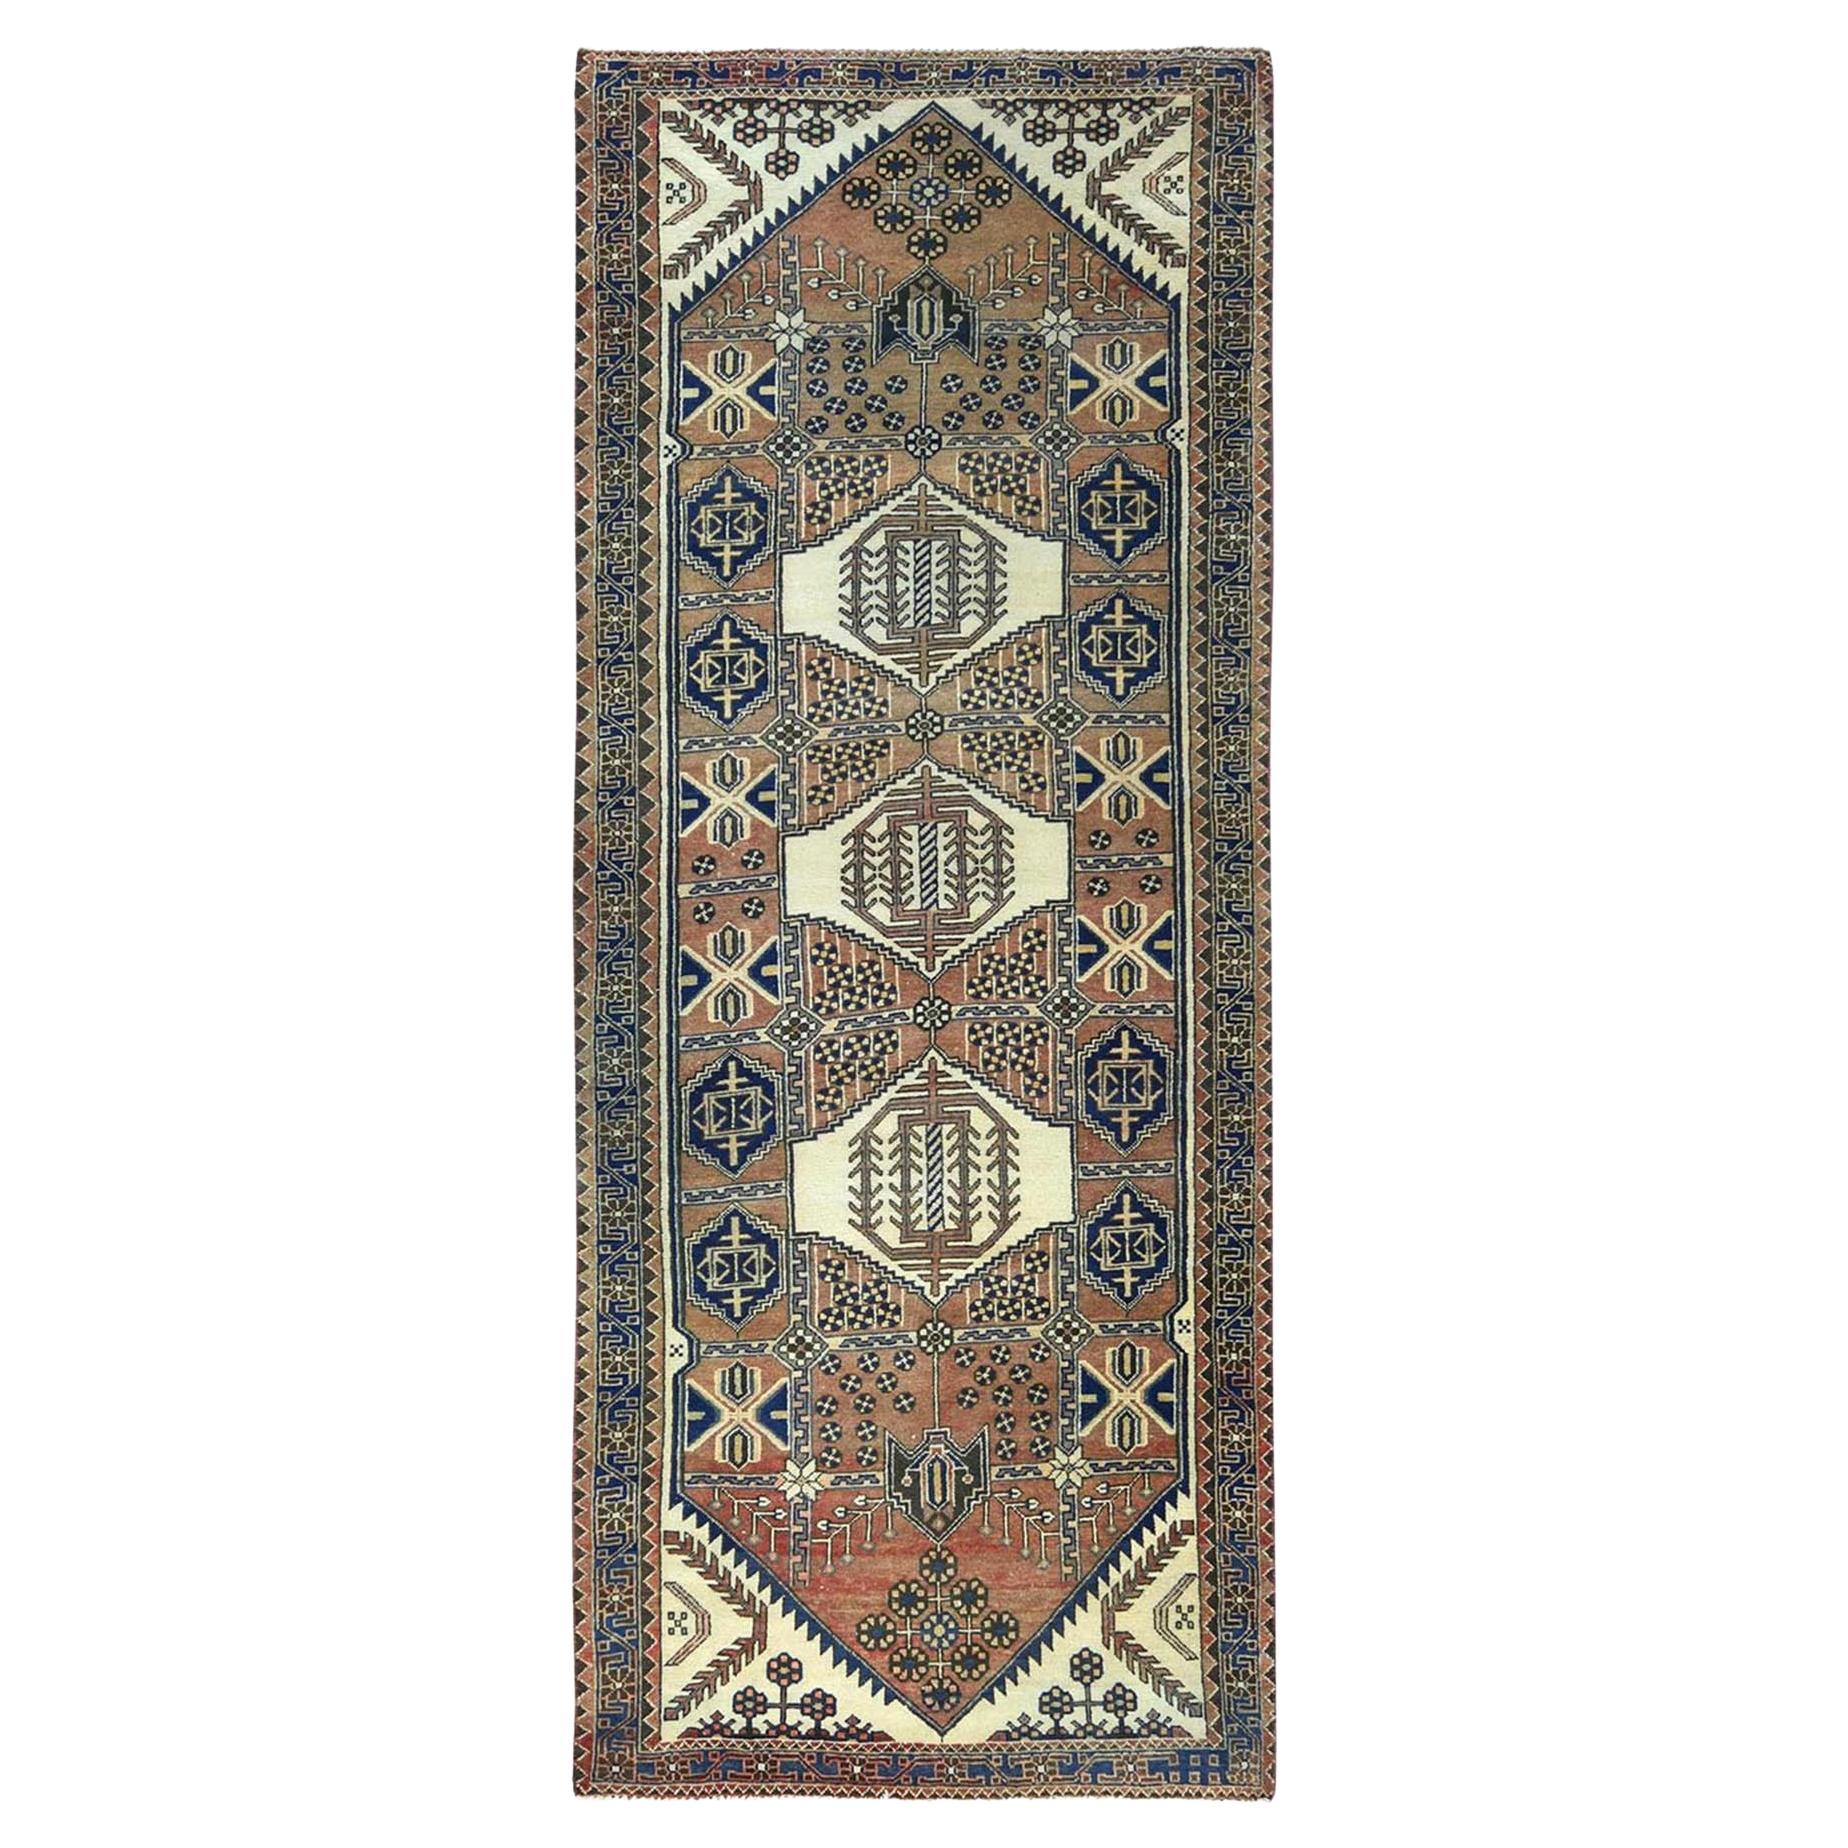 Mocha Brown with a Mix of Red Vintage Persian Heriz, Hand Knotted Worn Wool Rug